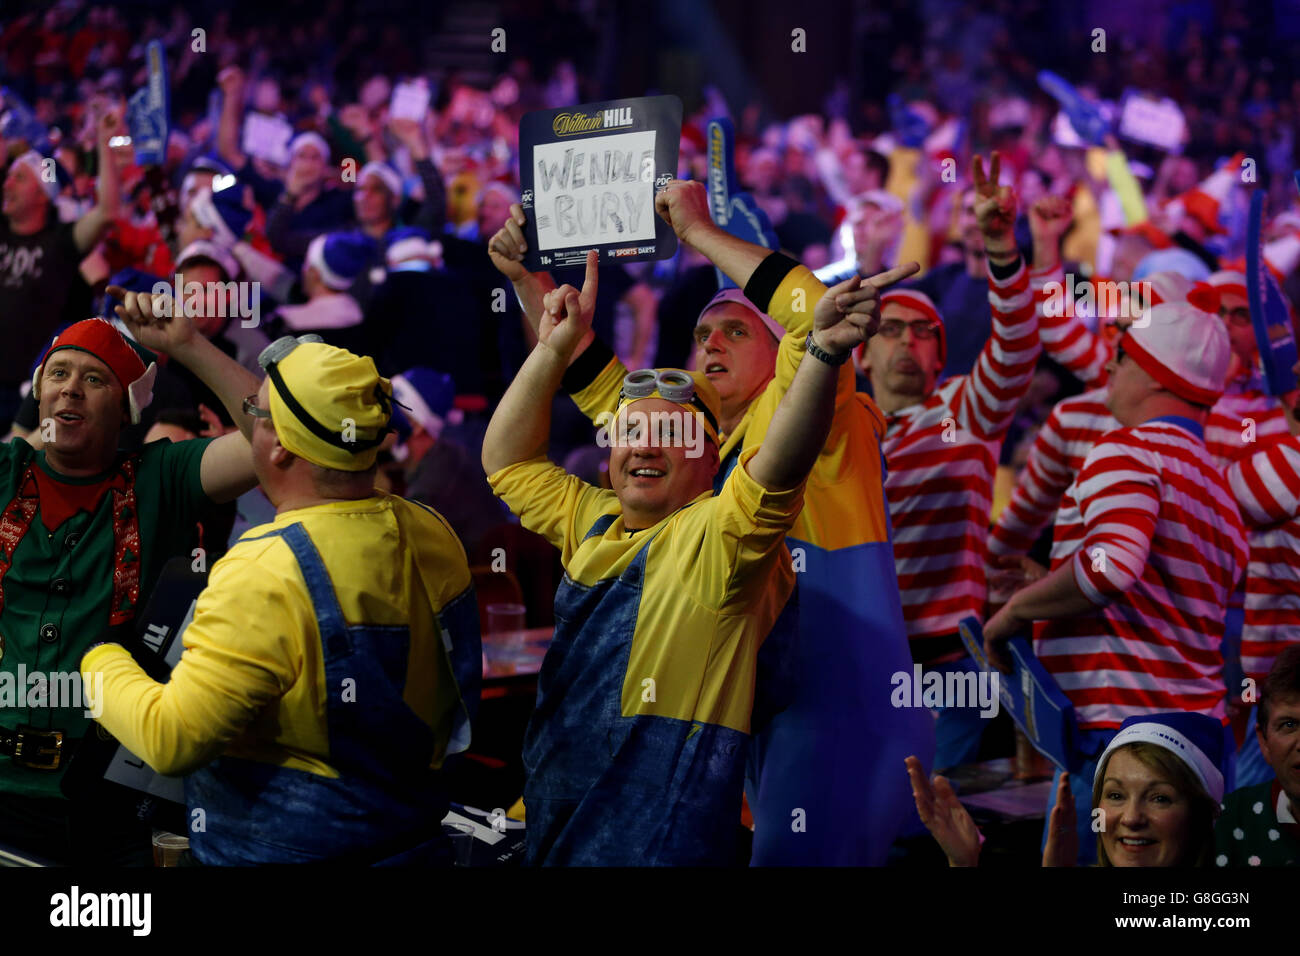 A general view of fans in fancy dress during day two of the William Hill PDC World Championship at Alexandra Palace, London. Stock Photo